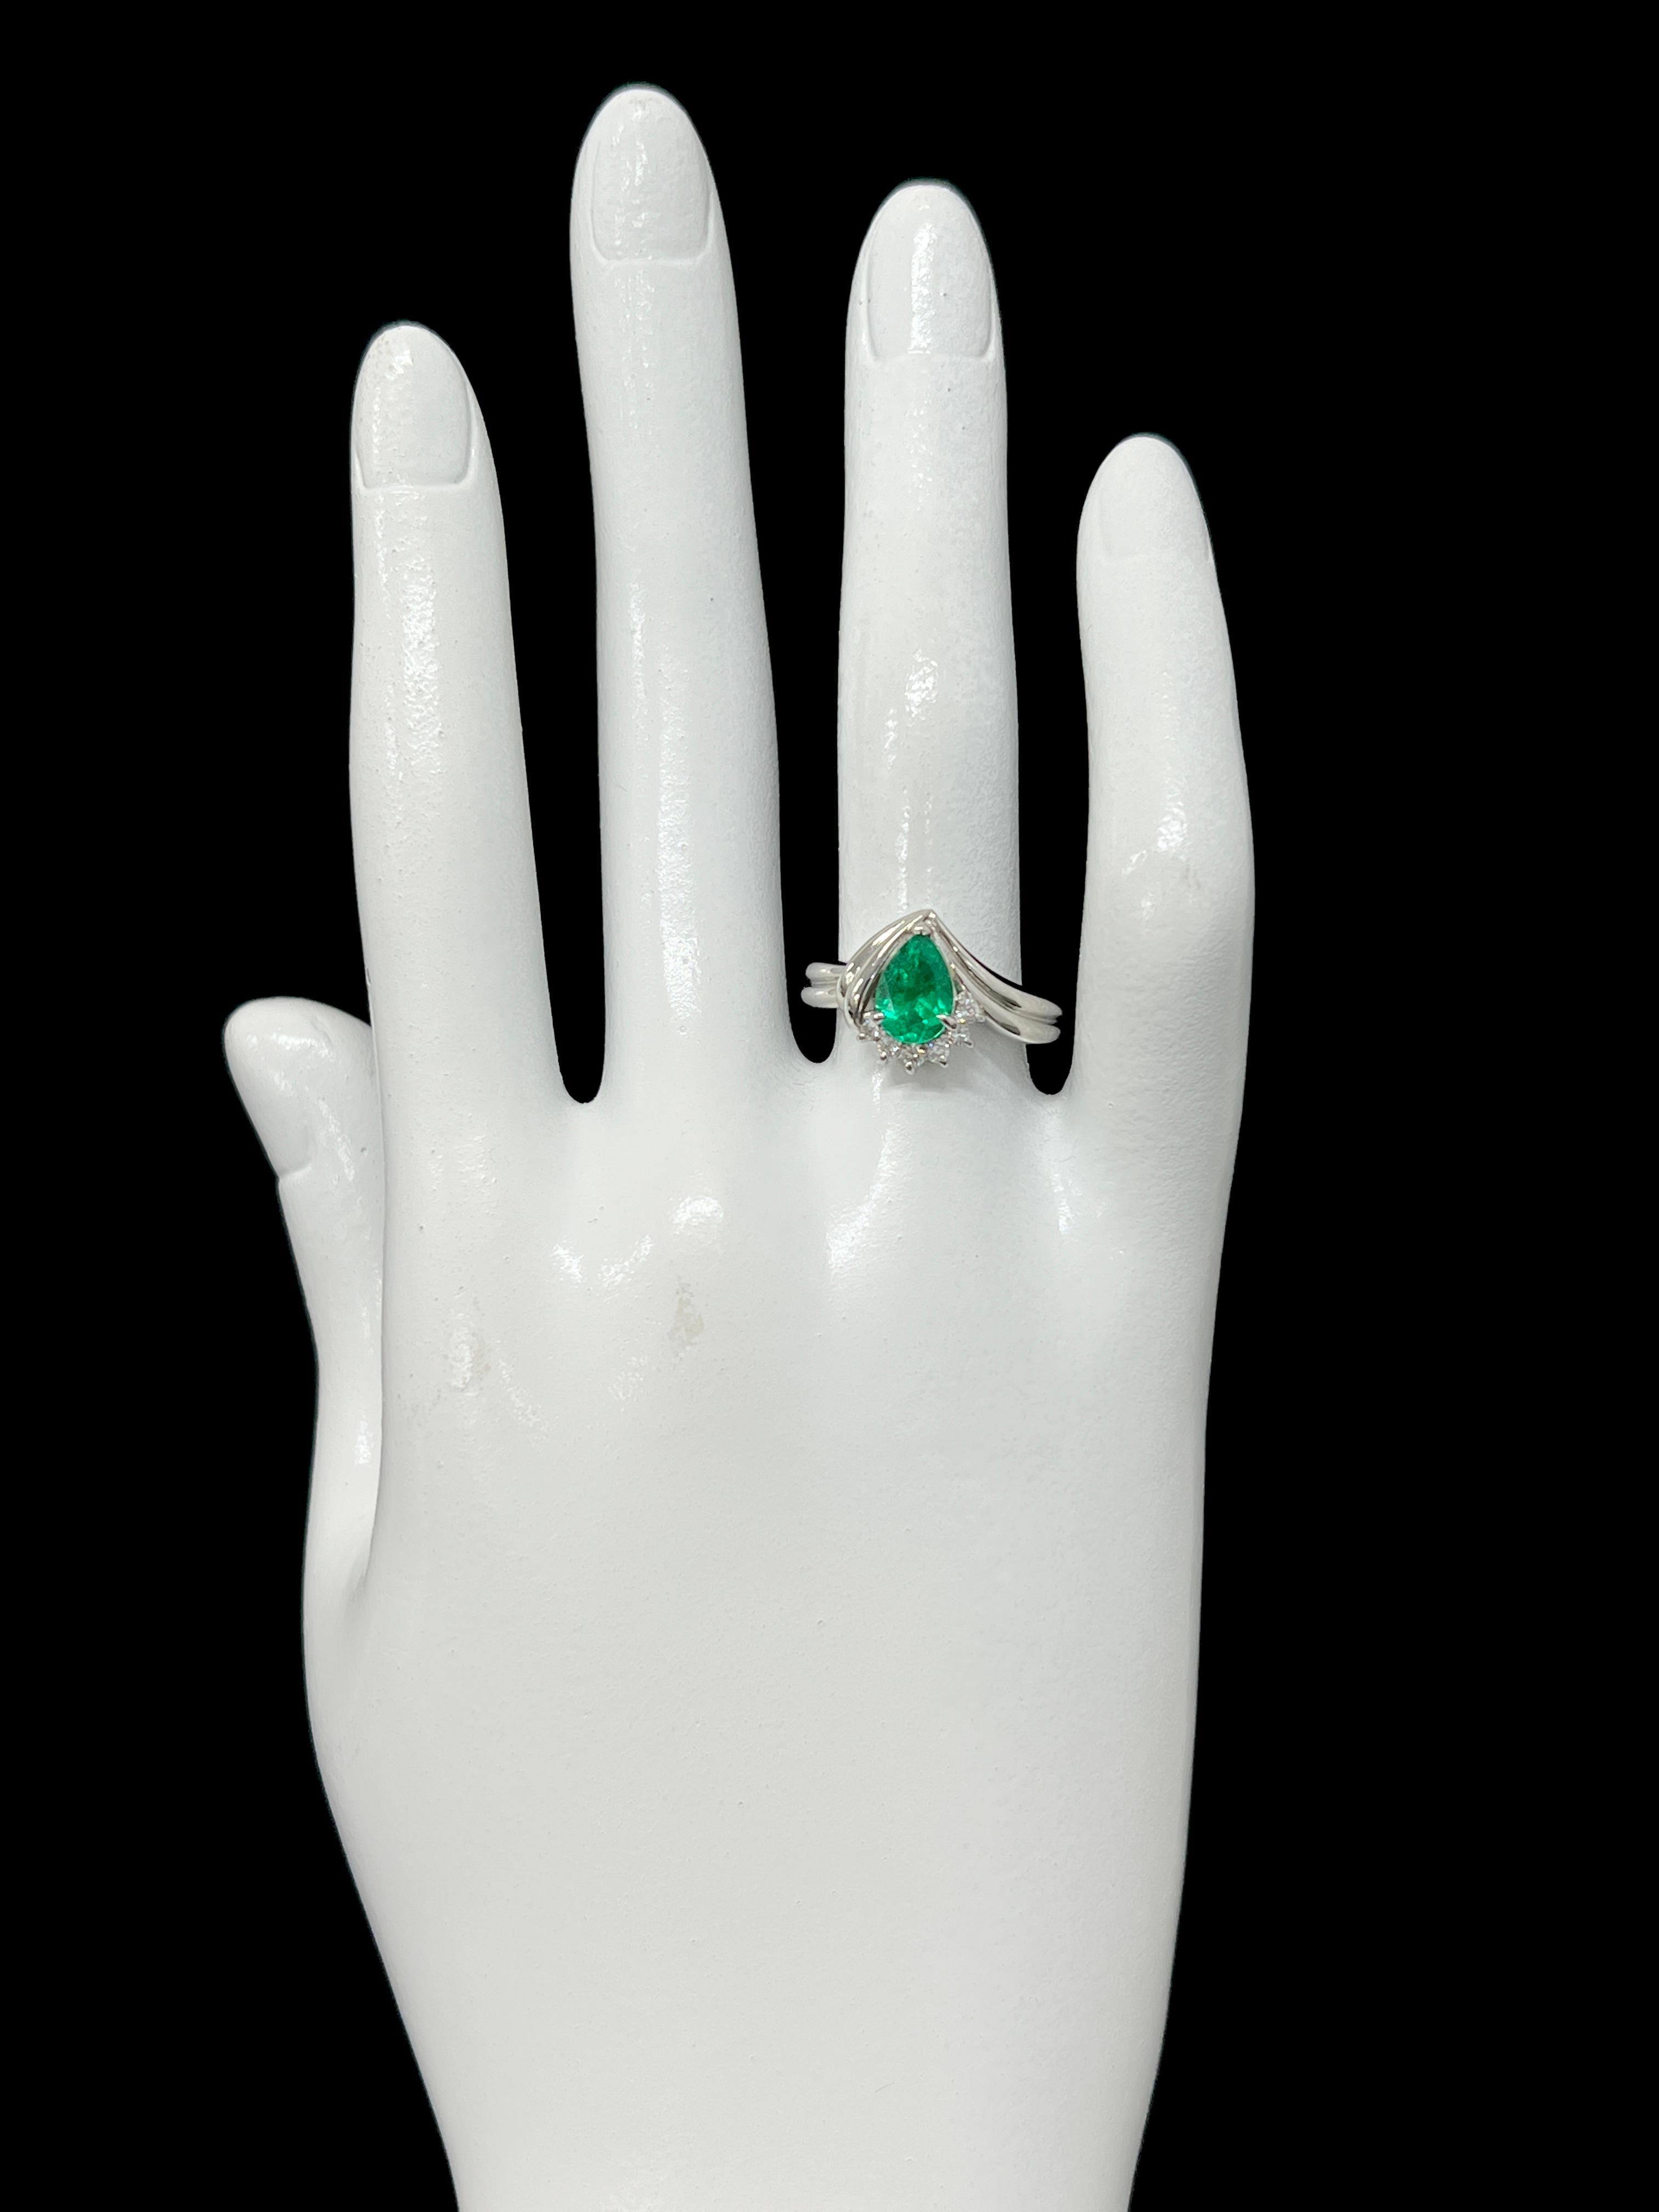 0.91 Carat Colombian, Pear-Cut Emerald and Diamond Ring Set in Platinum For Sale 1